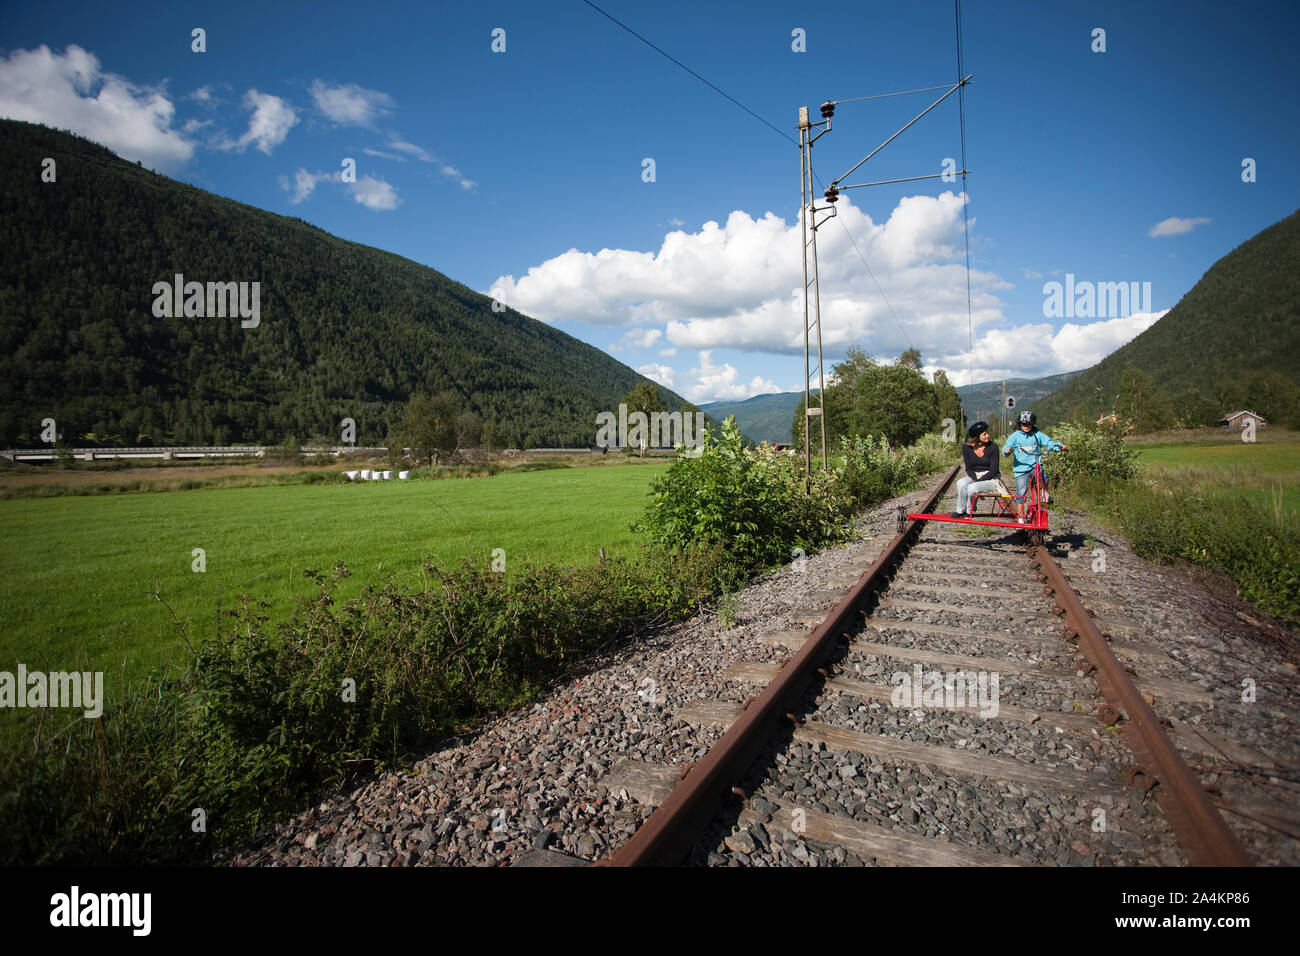 Mother and daughter driving 'dressin' - small carriage - on old railway track, Rjukan, Norway Stock Photo